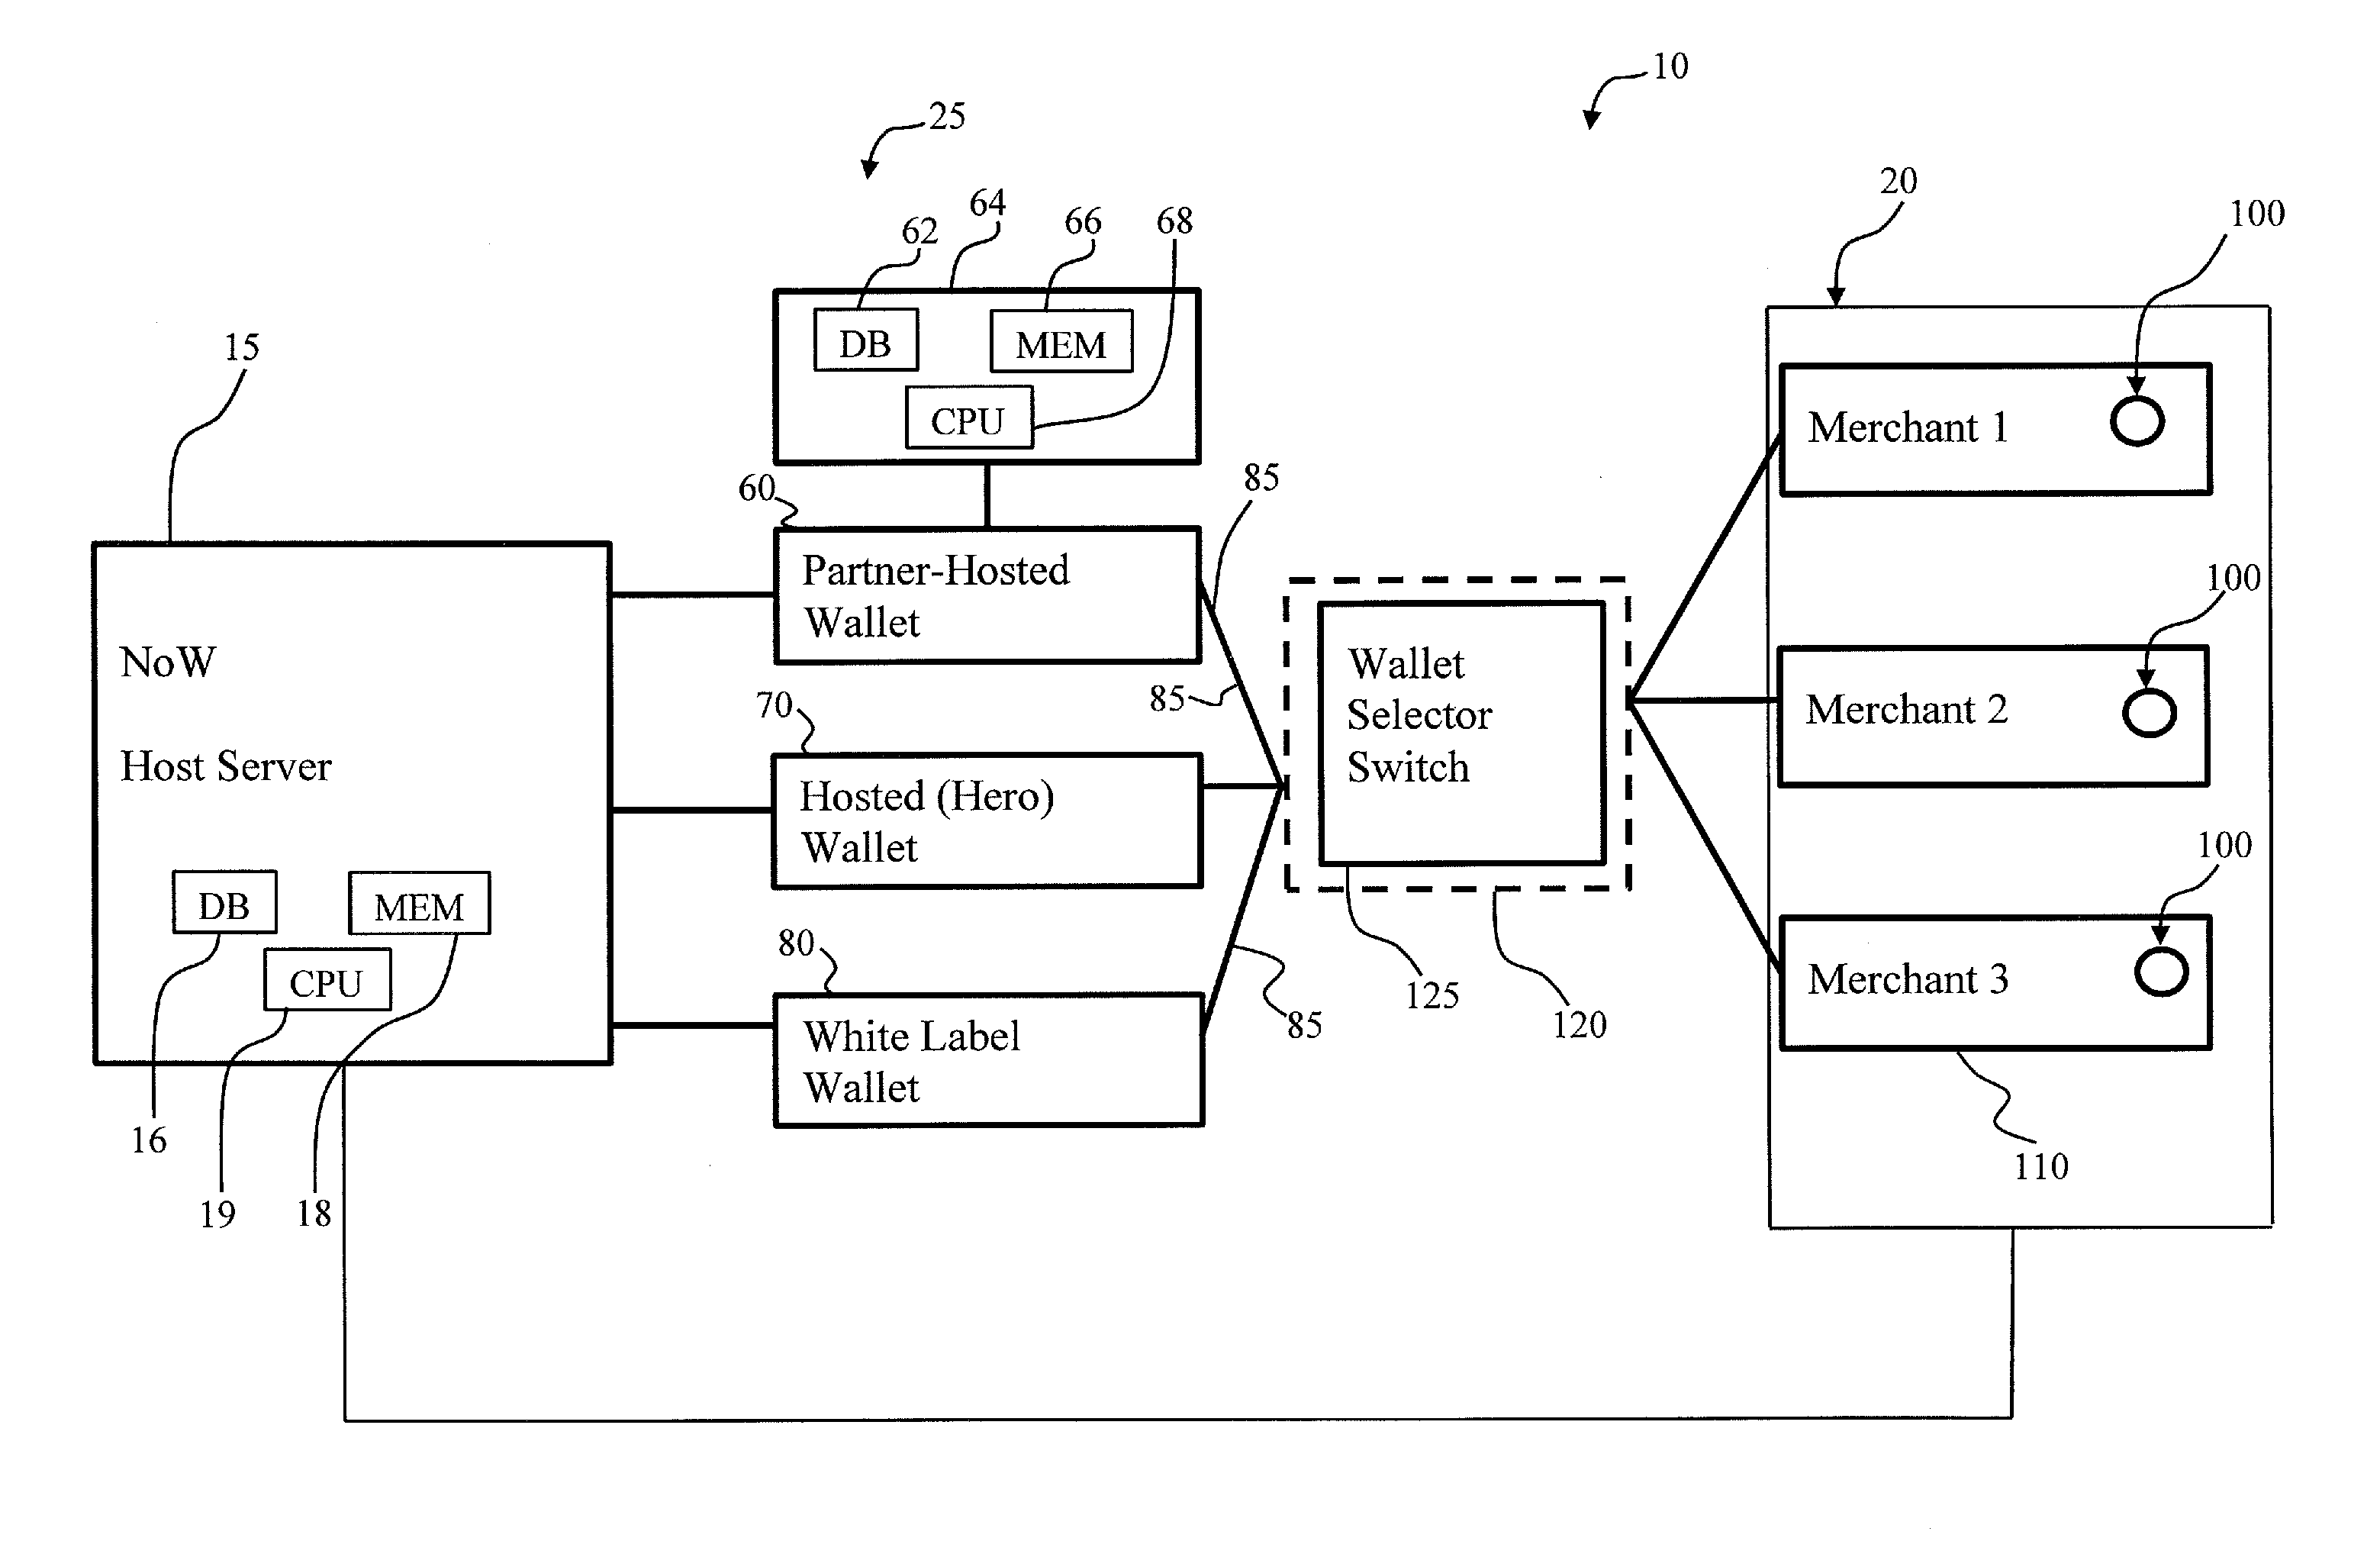 System and method to enable a network of digital wallets